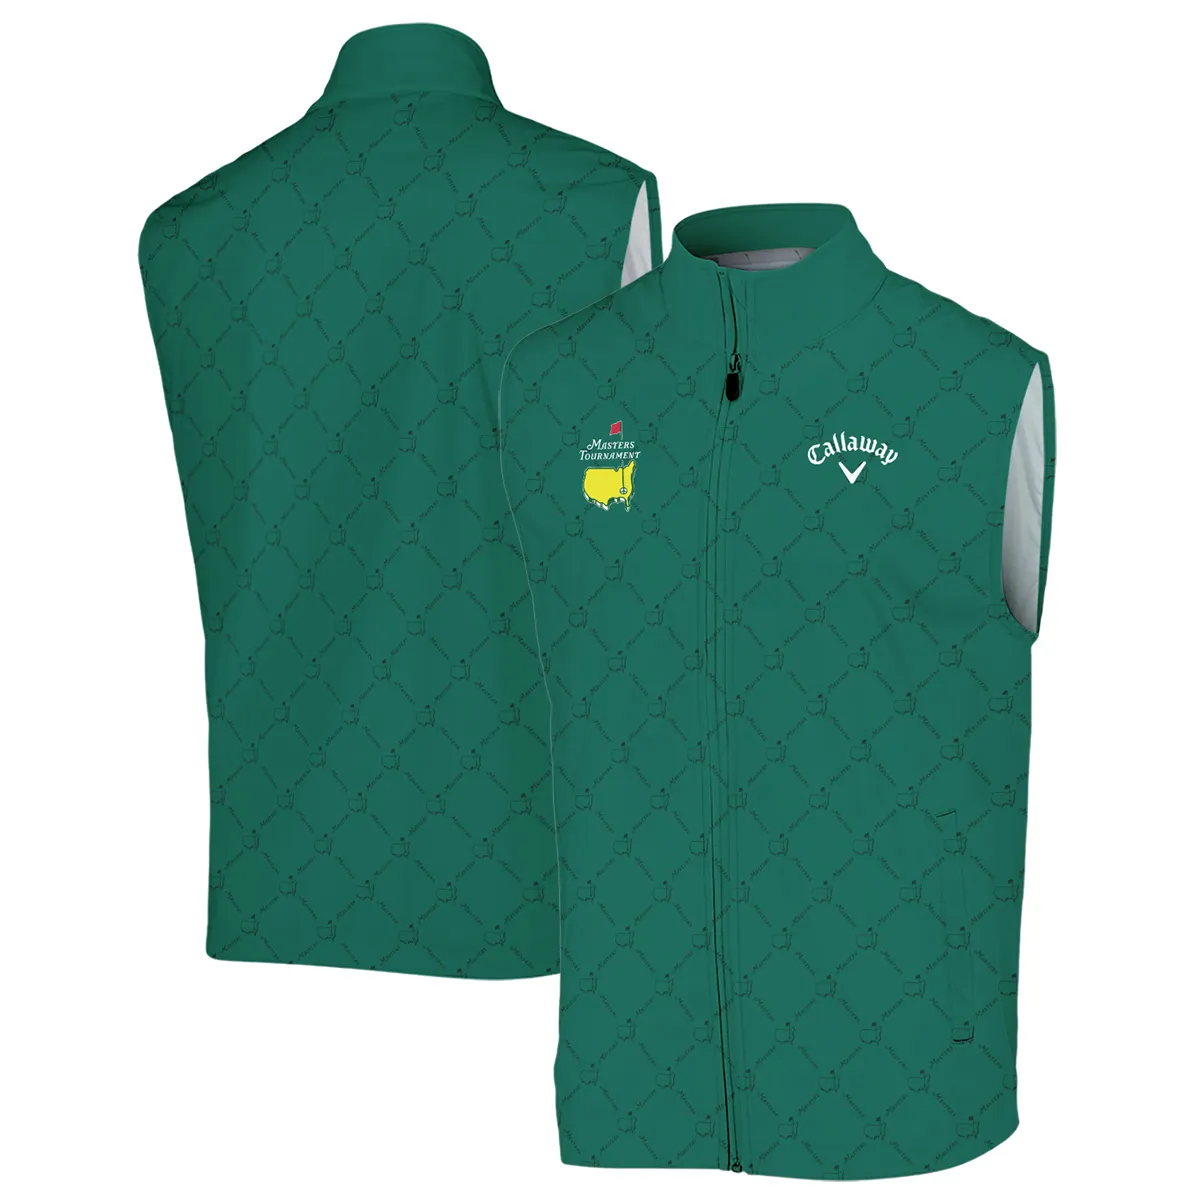 Golf Sport Pattern Color Green Mix Black Masters Tournament Callaway Vneck Polo Shirt Style Classic